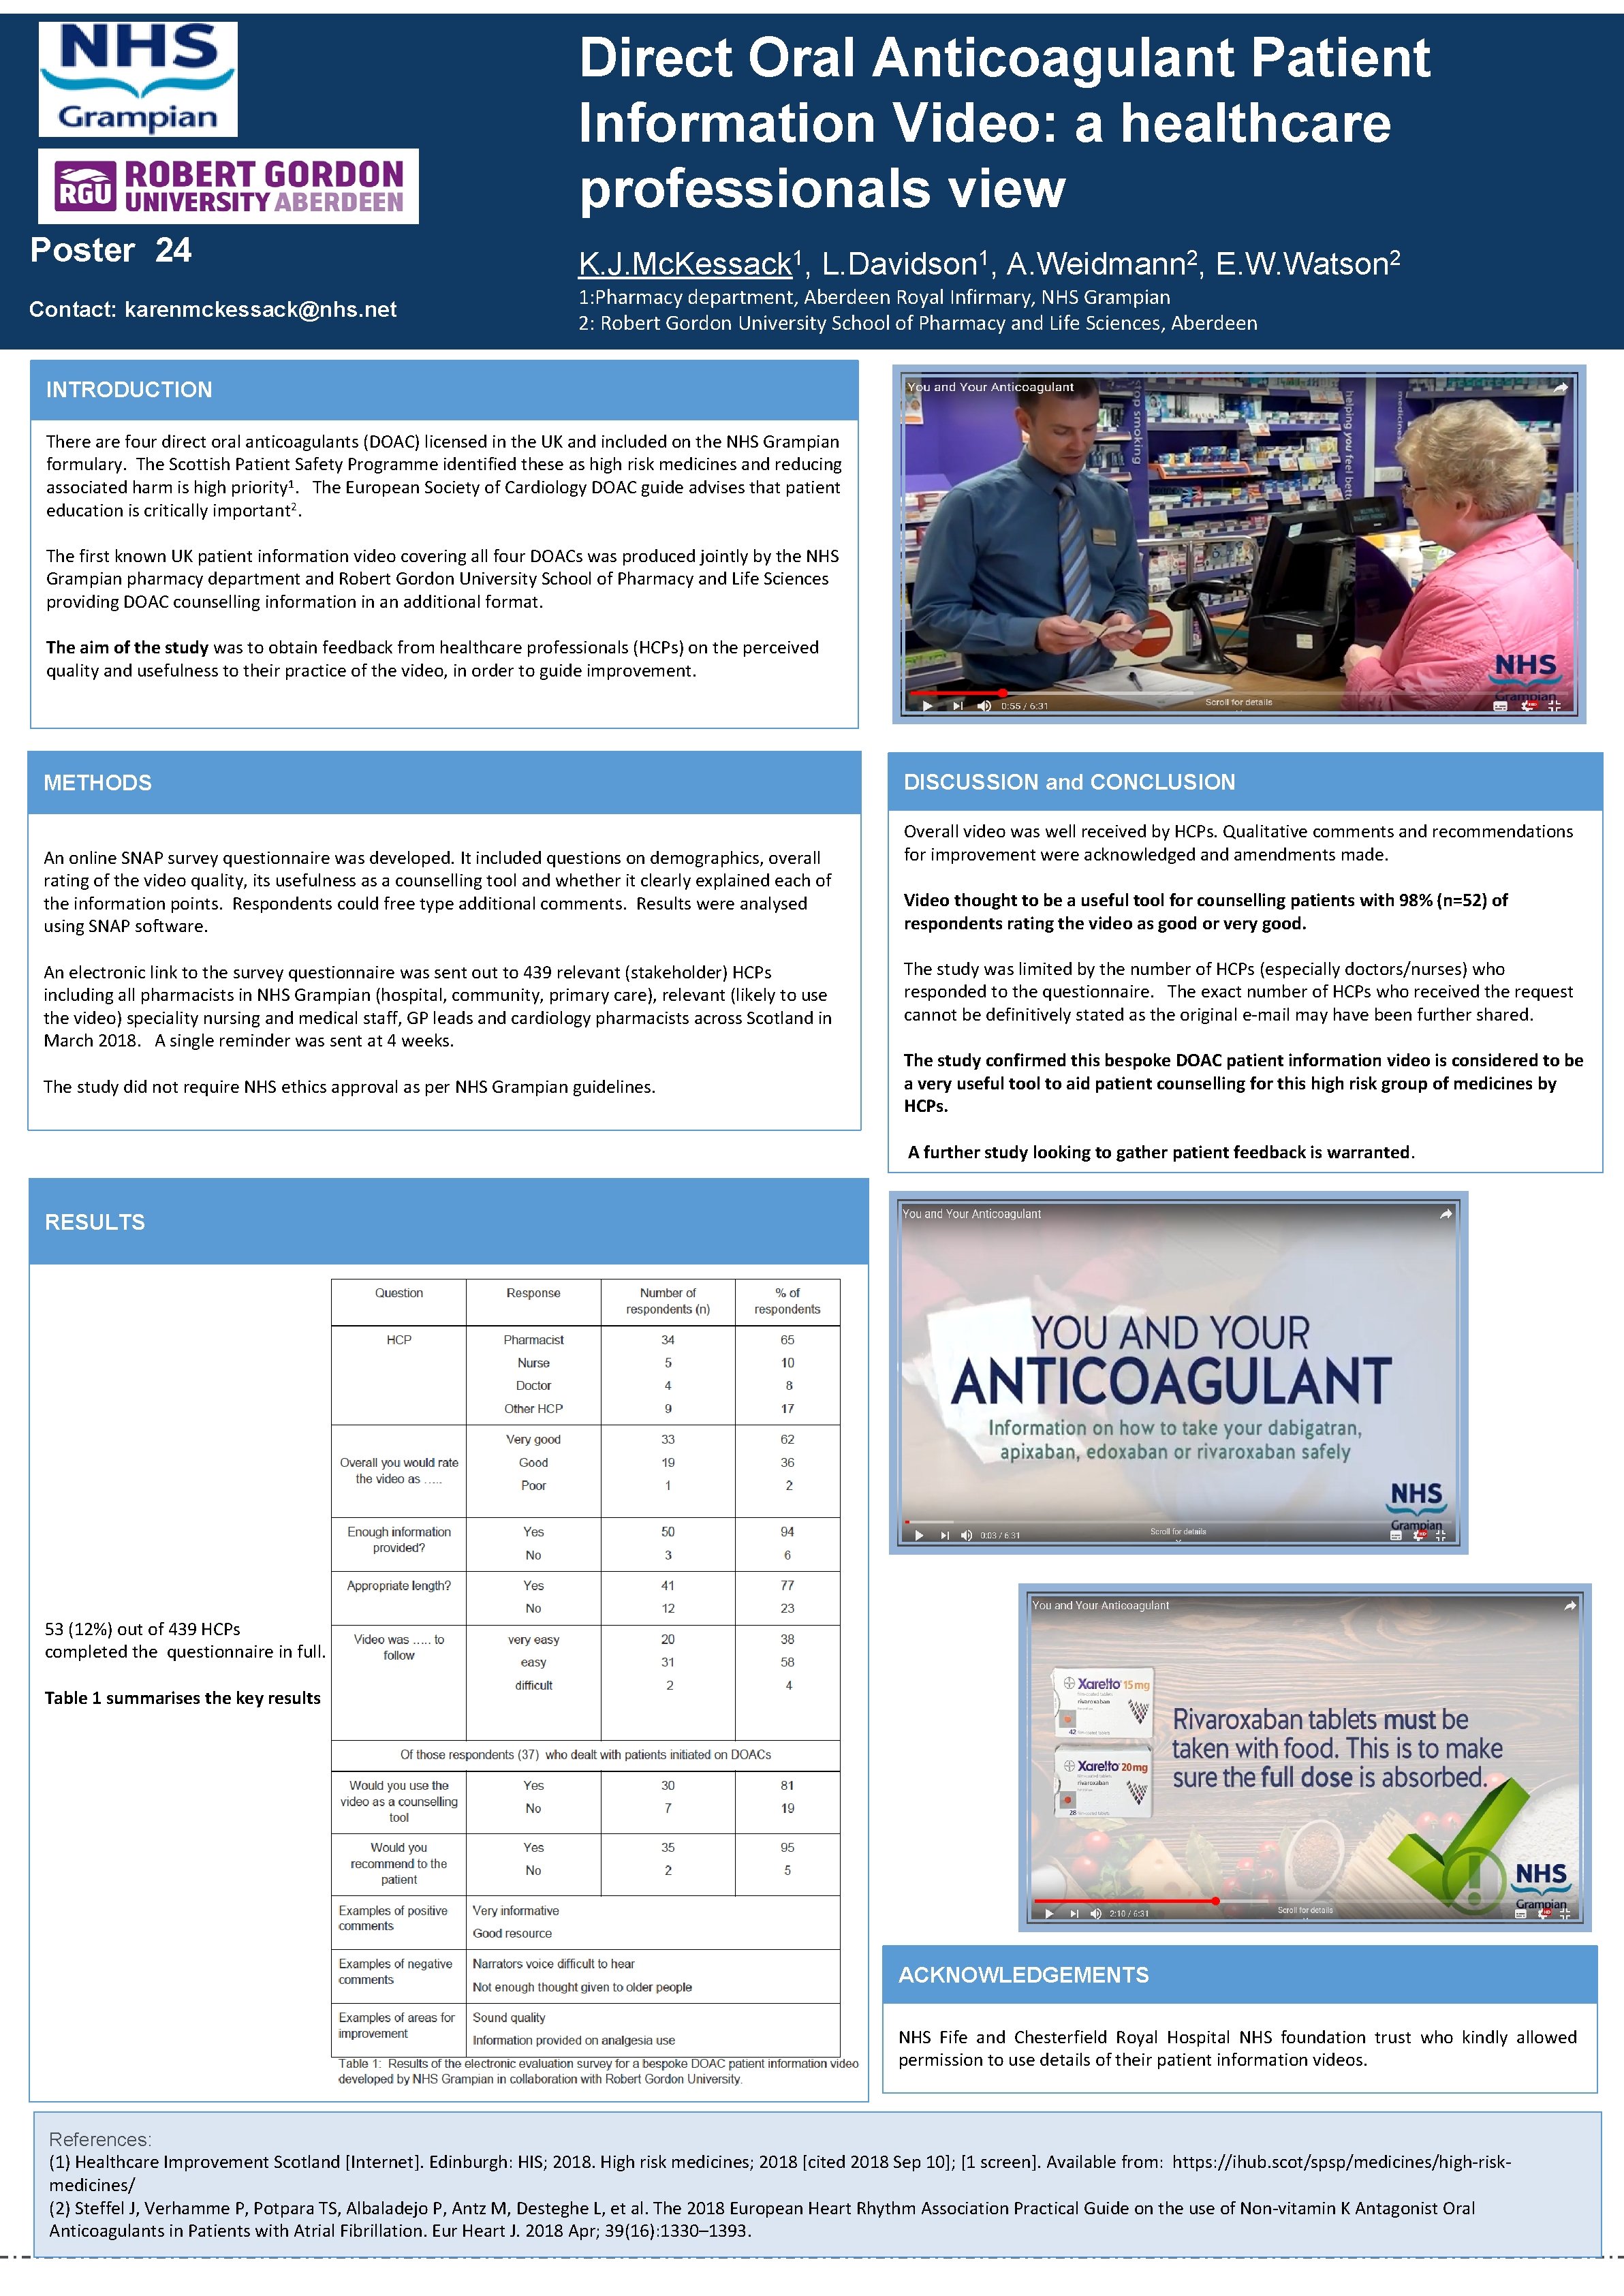 Direct Oral Anticoagulant Patient Information Video: a healthcare professionals view Poster 24 Contact: karenmckessack@nhs.